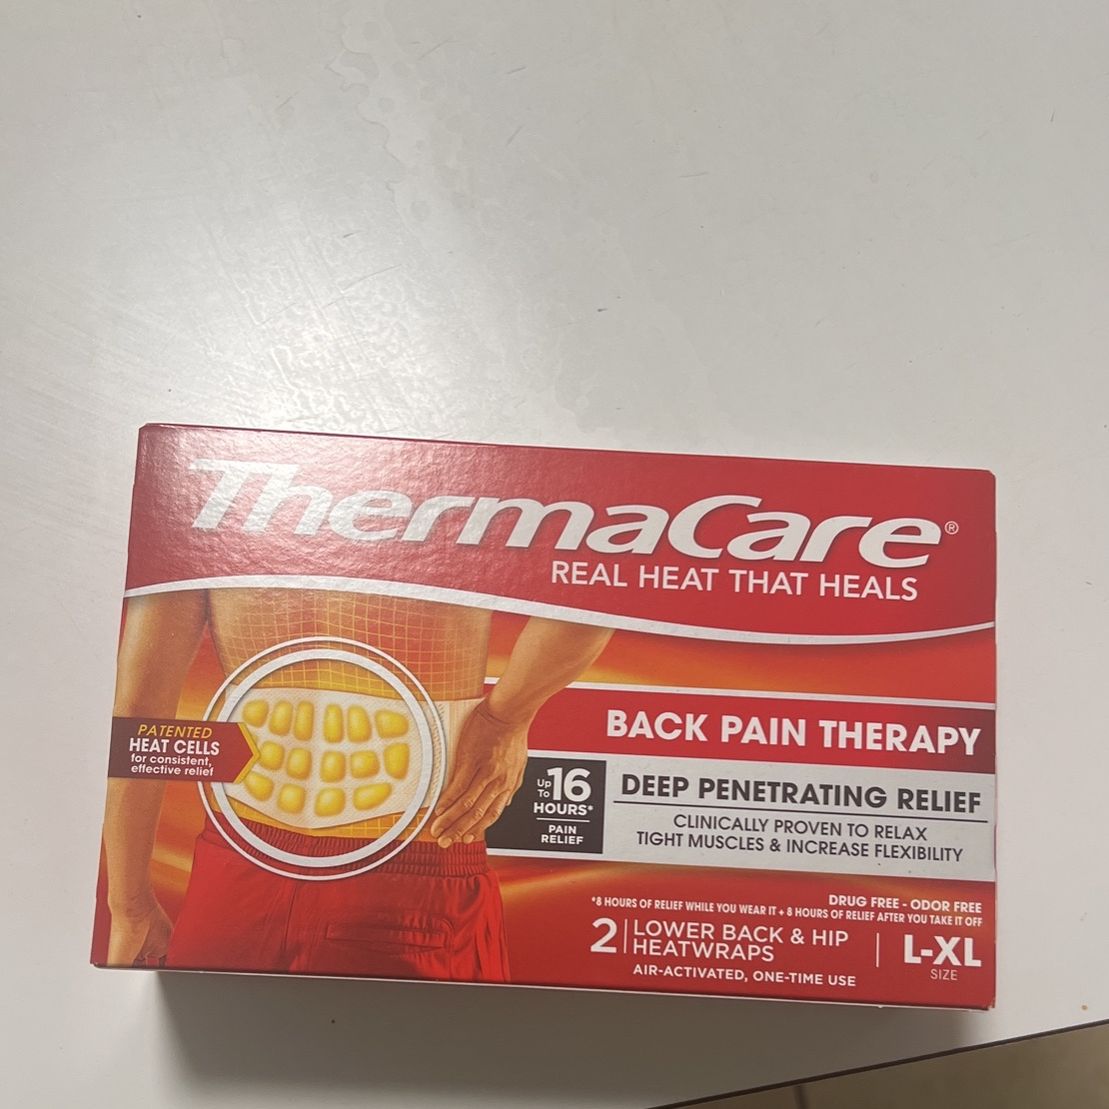 ThermaCare REAL HEAT THAT HEALS